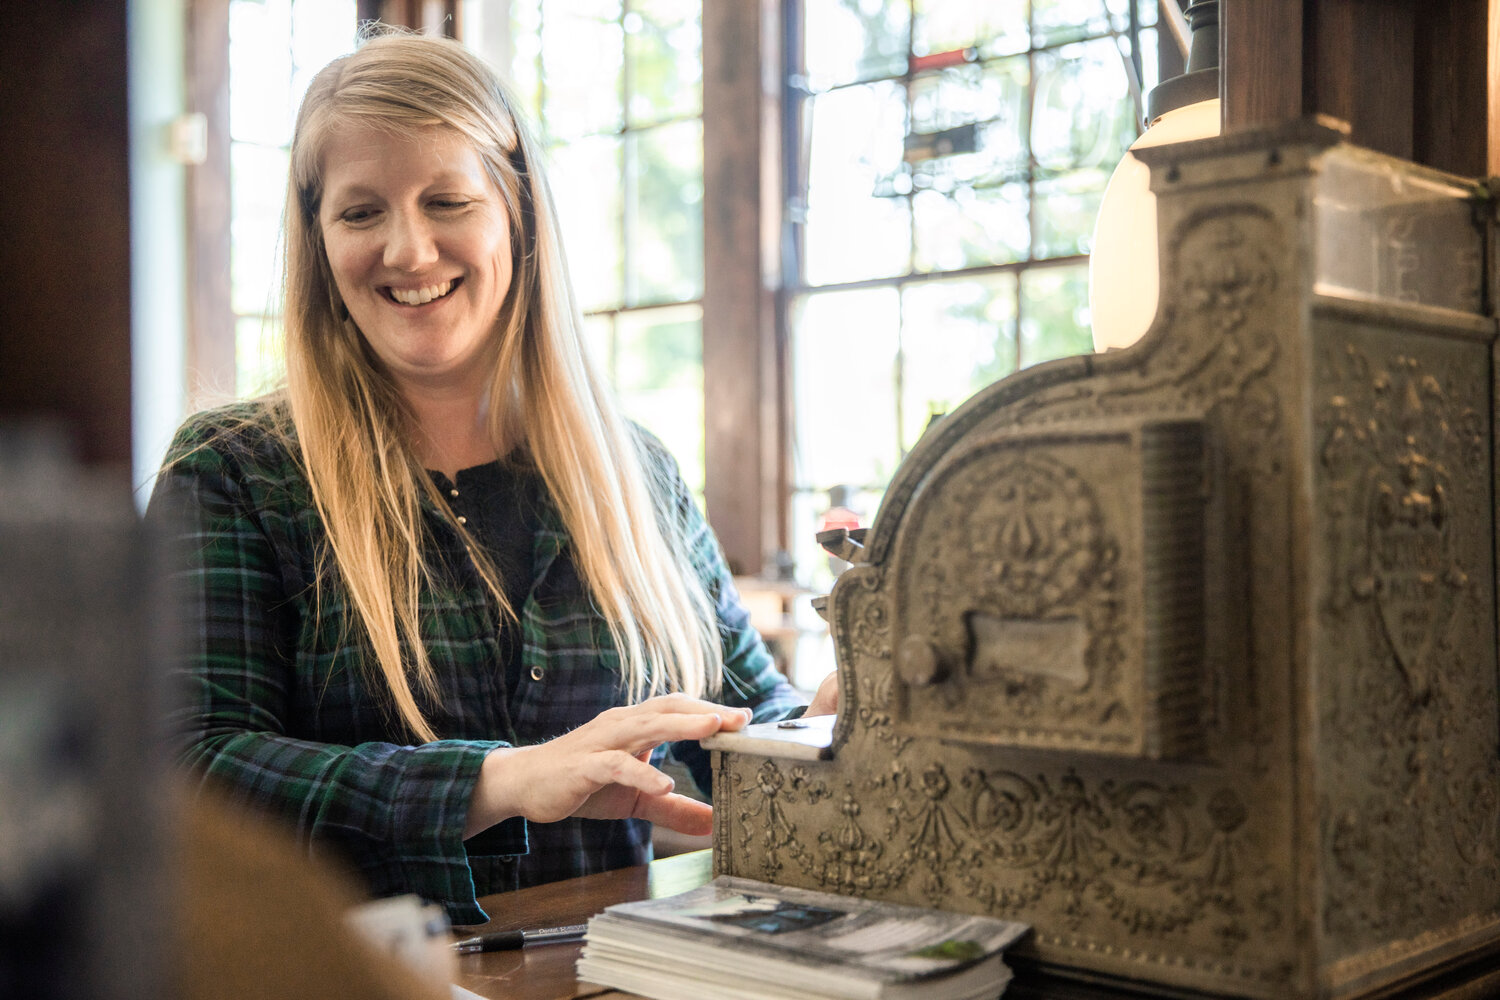 Tenino PARC (parks, arts, recreation and culture) Director Jessica Reeves-Rush smiles as an old cash register dings inside the Tenino Depot Museum on Friday after the sale of a new book she co-authored with the city historian celebrating the 150th birthday of the Stone City.